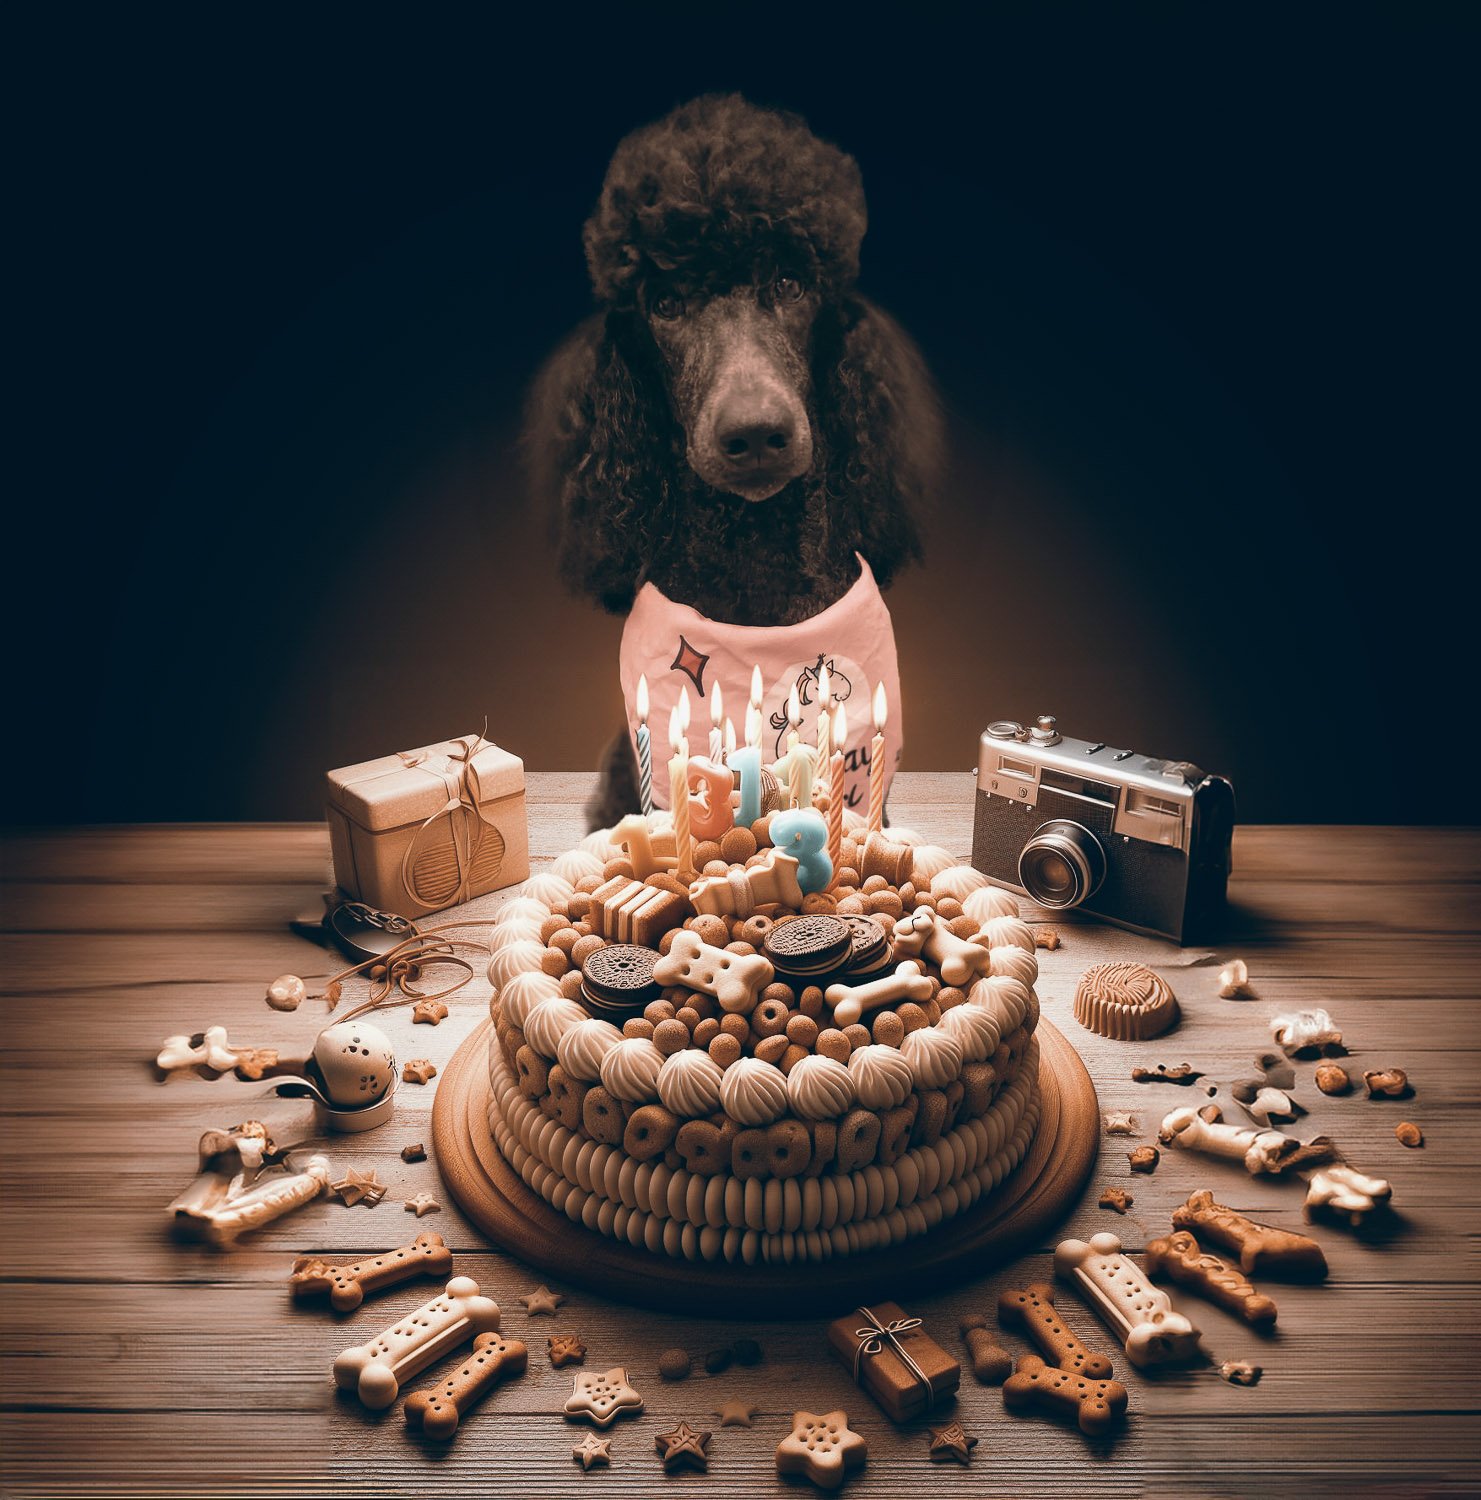 A black Poodle dog wearing a pink top sitting in front of a birthday cake made from doggie treats